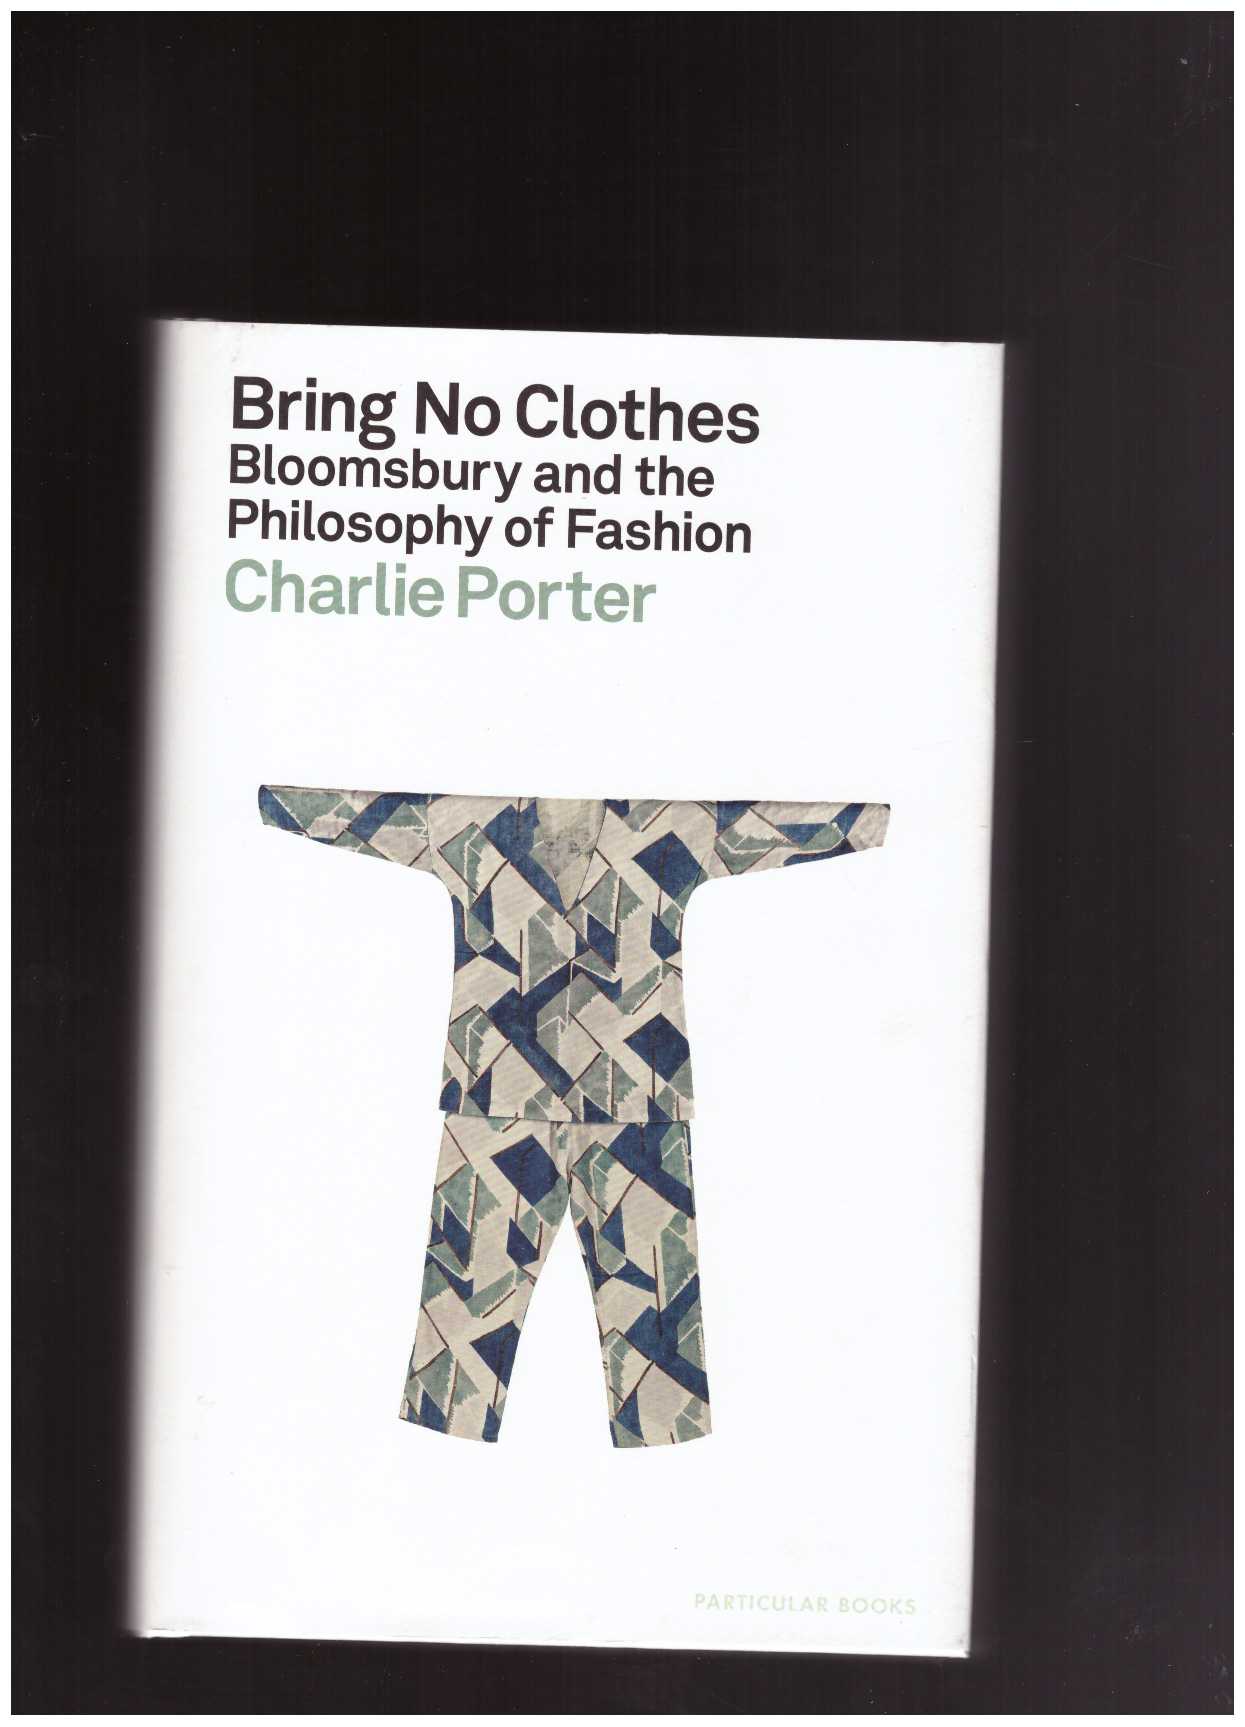 PORTER, Charlie - Bring No Clothes: Bloomsbury and the Philosophy of Fashion